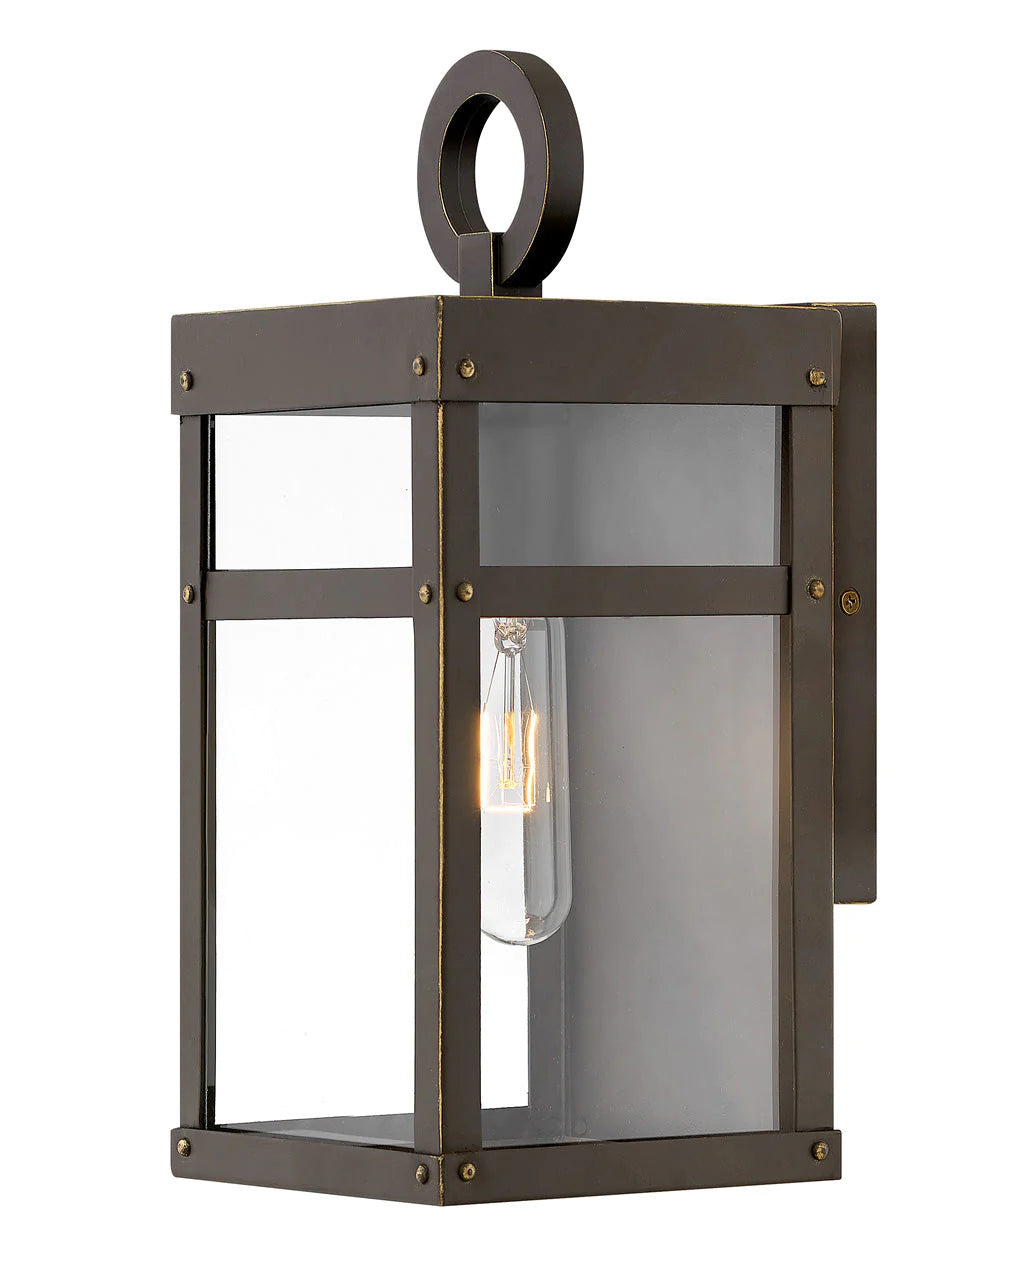 Hinkley Porter 1 Light Oil Rubbed Bronze and Clear Glass Outdoor Lantern Lighting Affairs